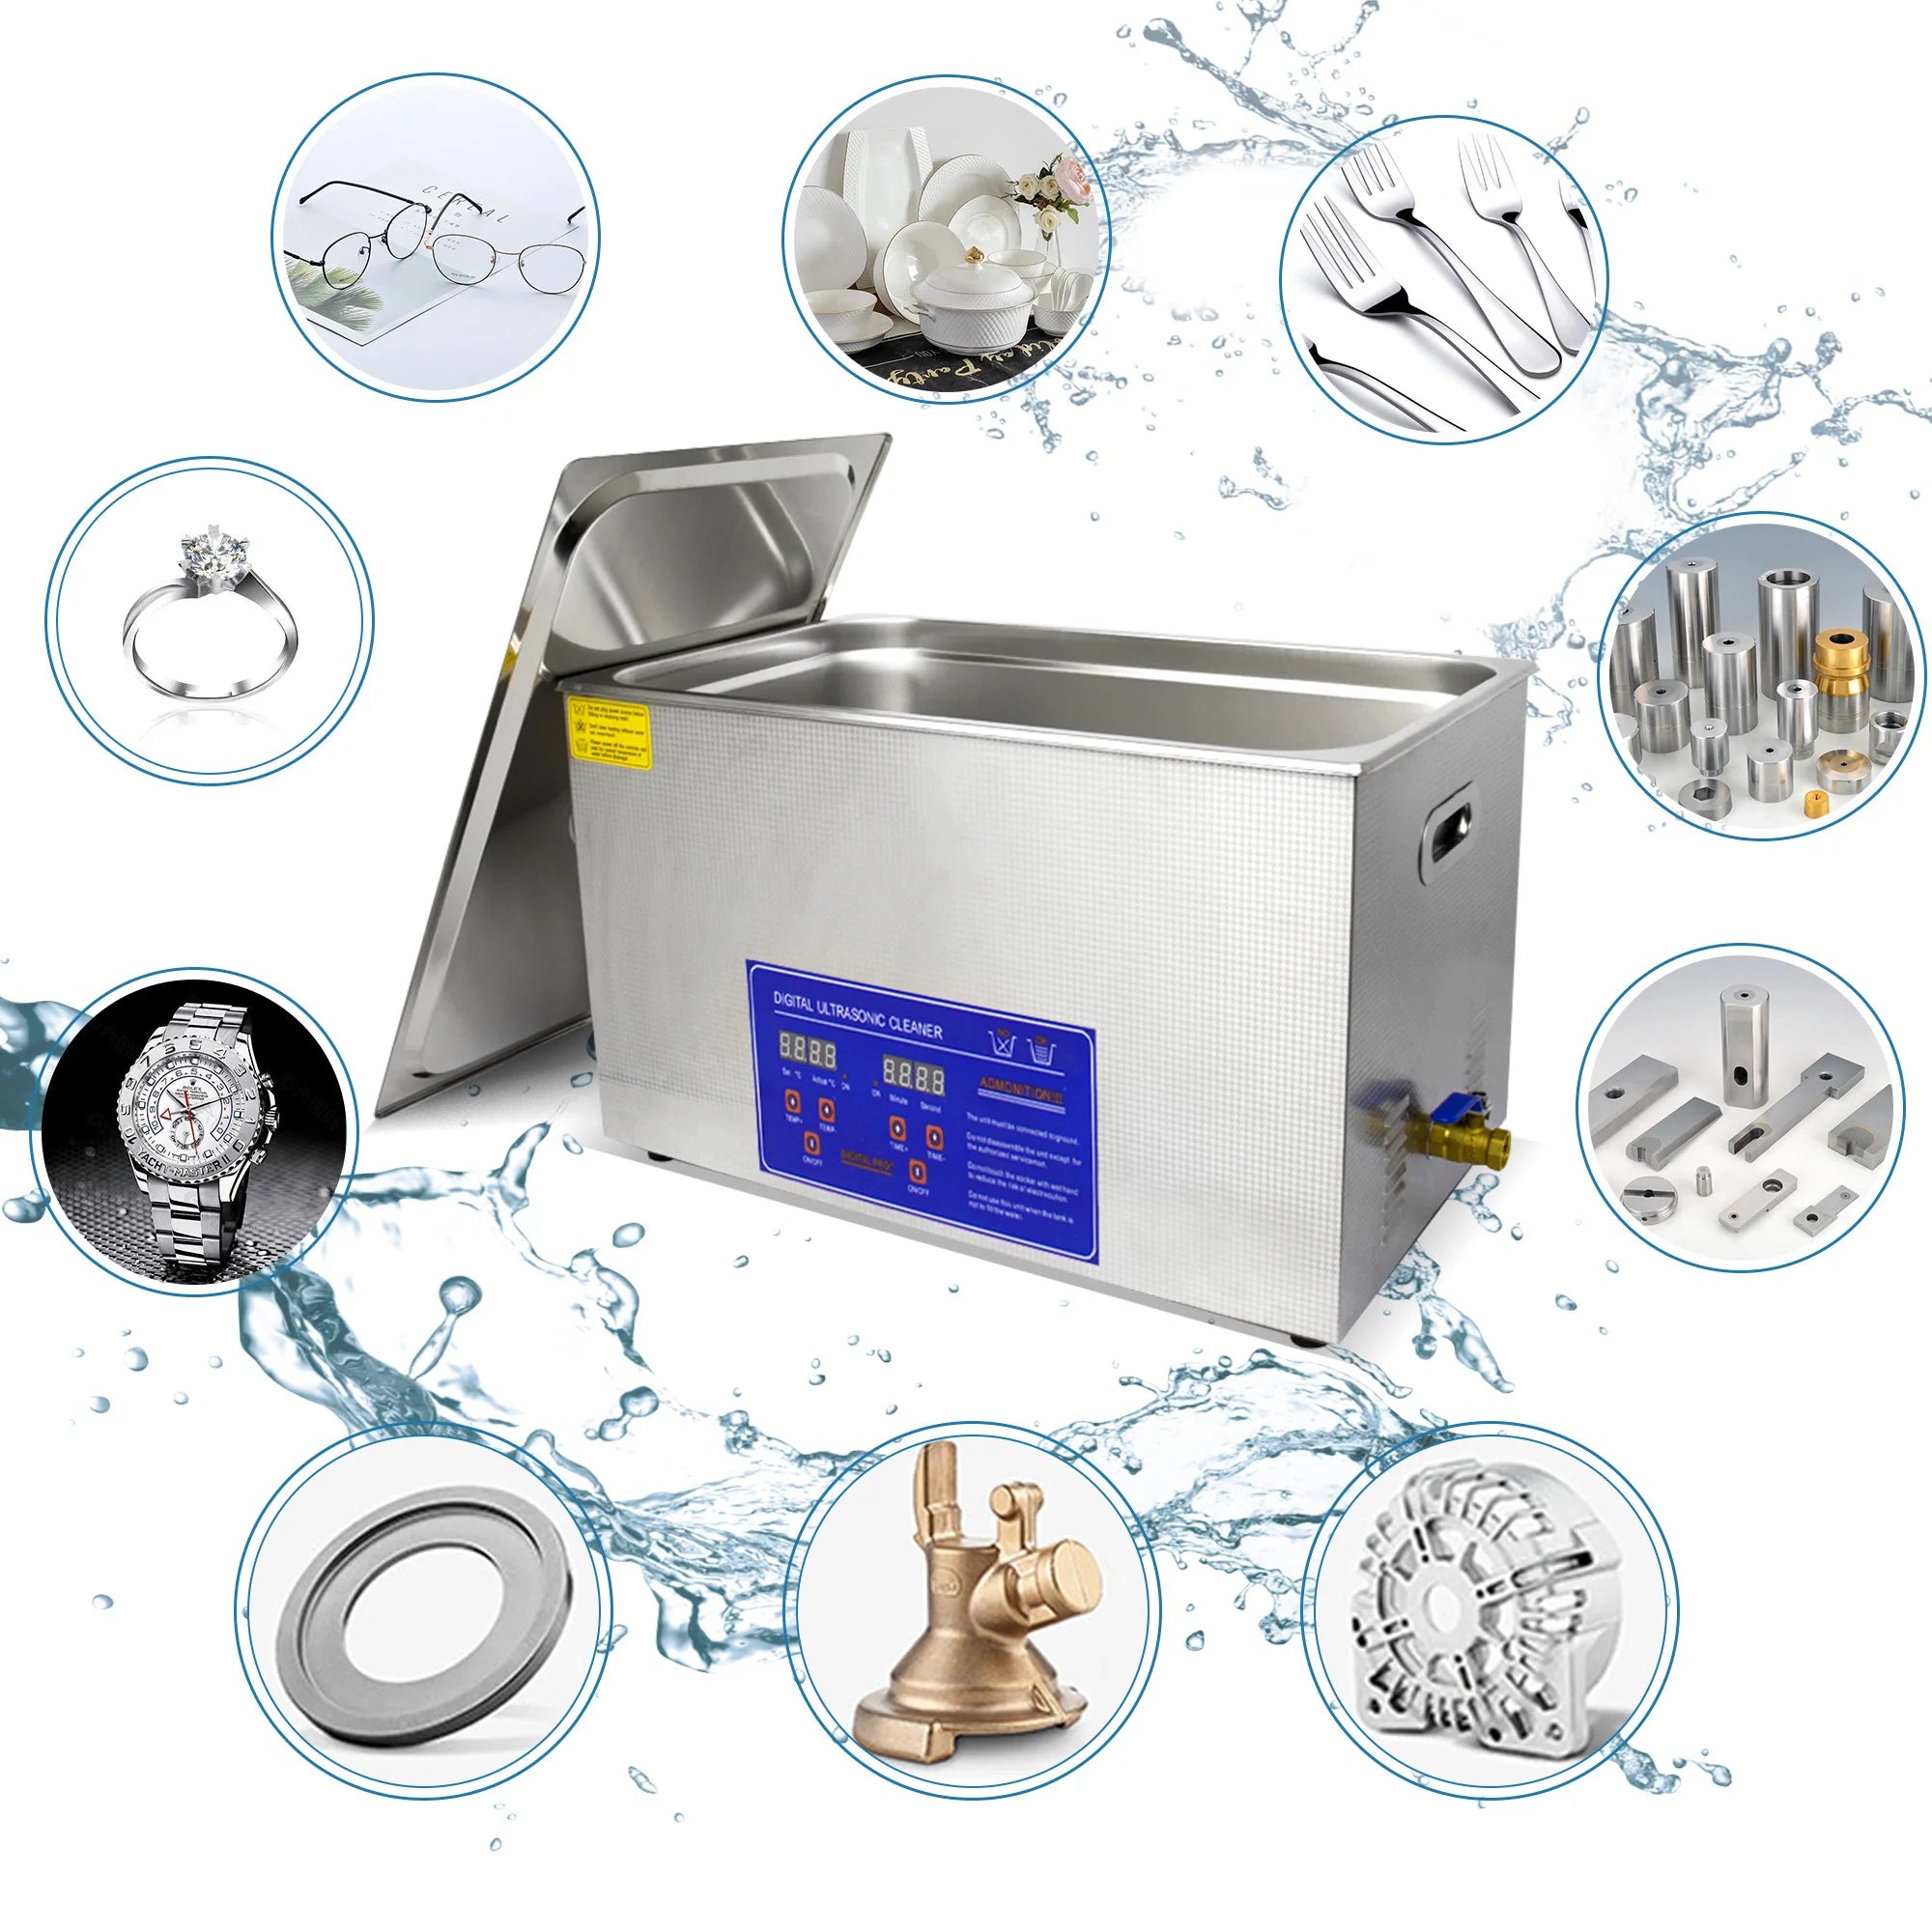 2/3/10/30L Stainless Steel Ultrasonic Cleaner Industrial Ultrasound Washing Machine with Digital Timer Heater Home Appliances